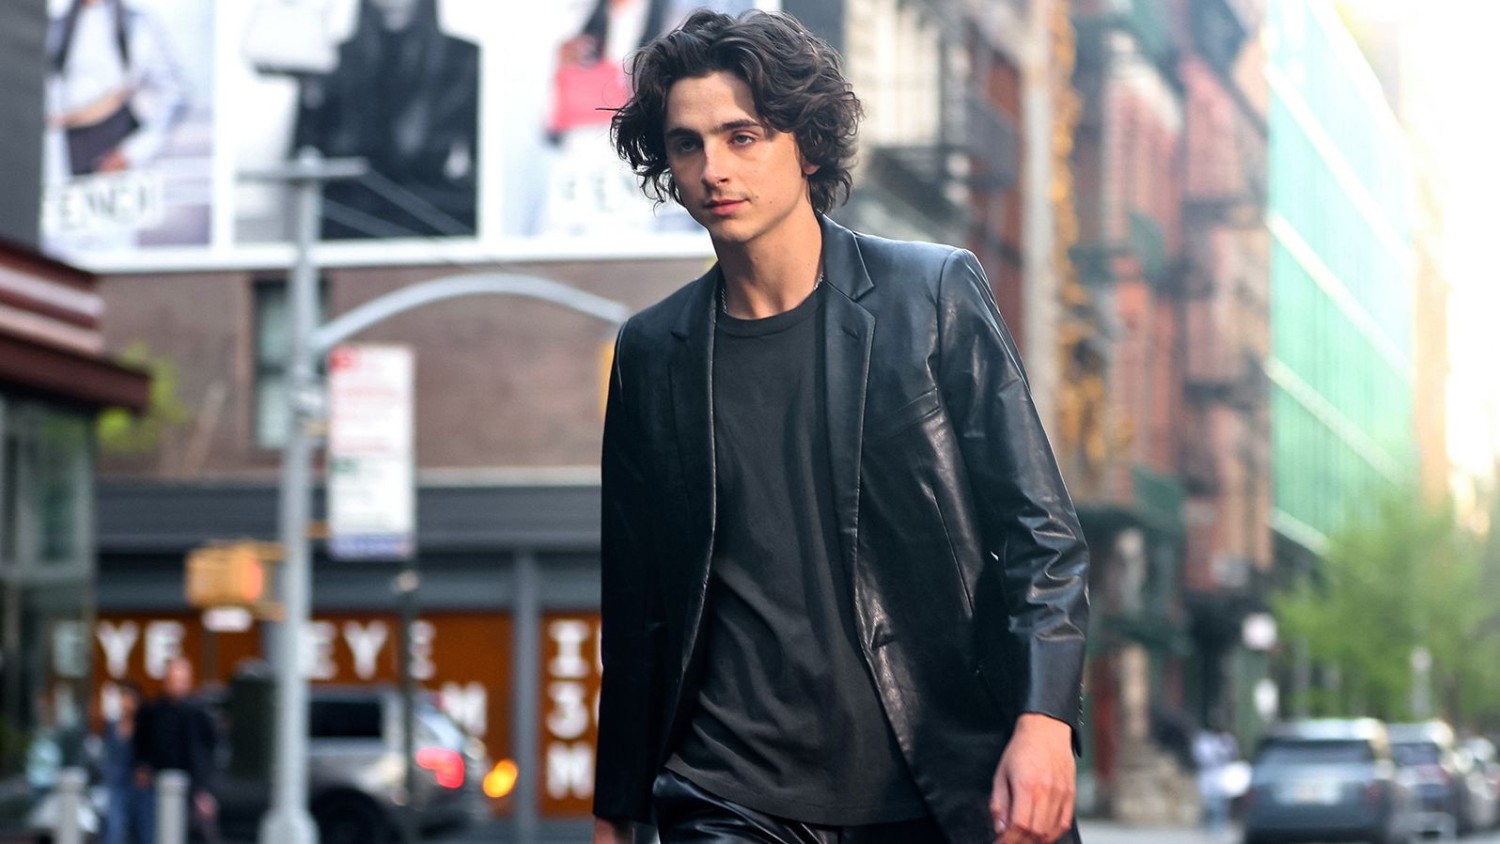 Timothée Chalamet is seen on the set of a commercial in New York City.